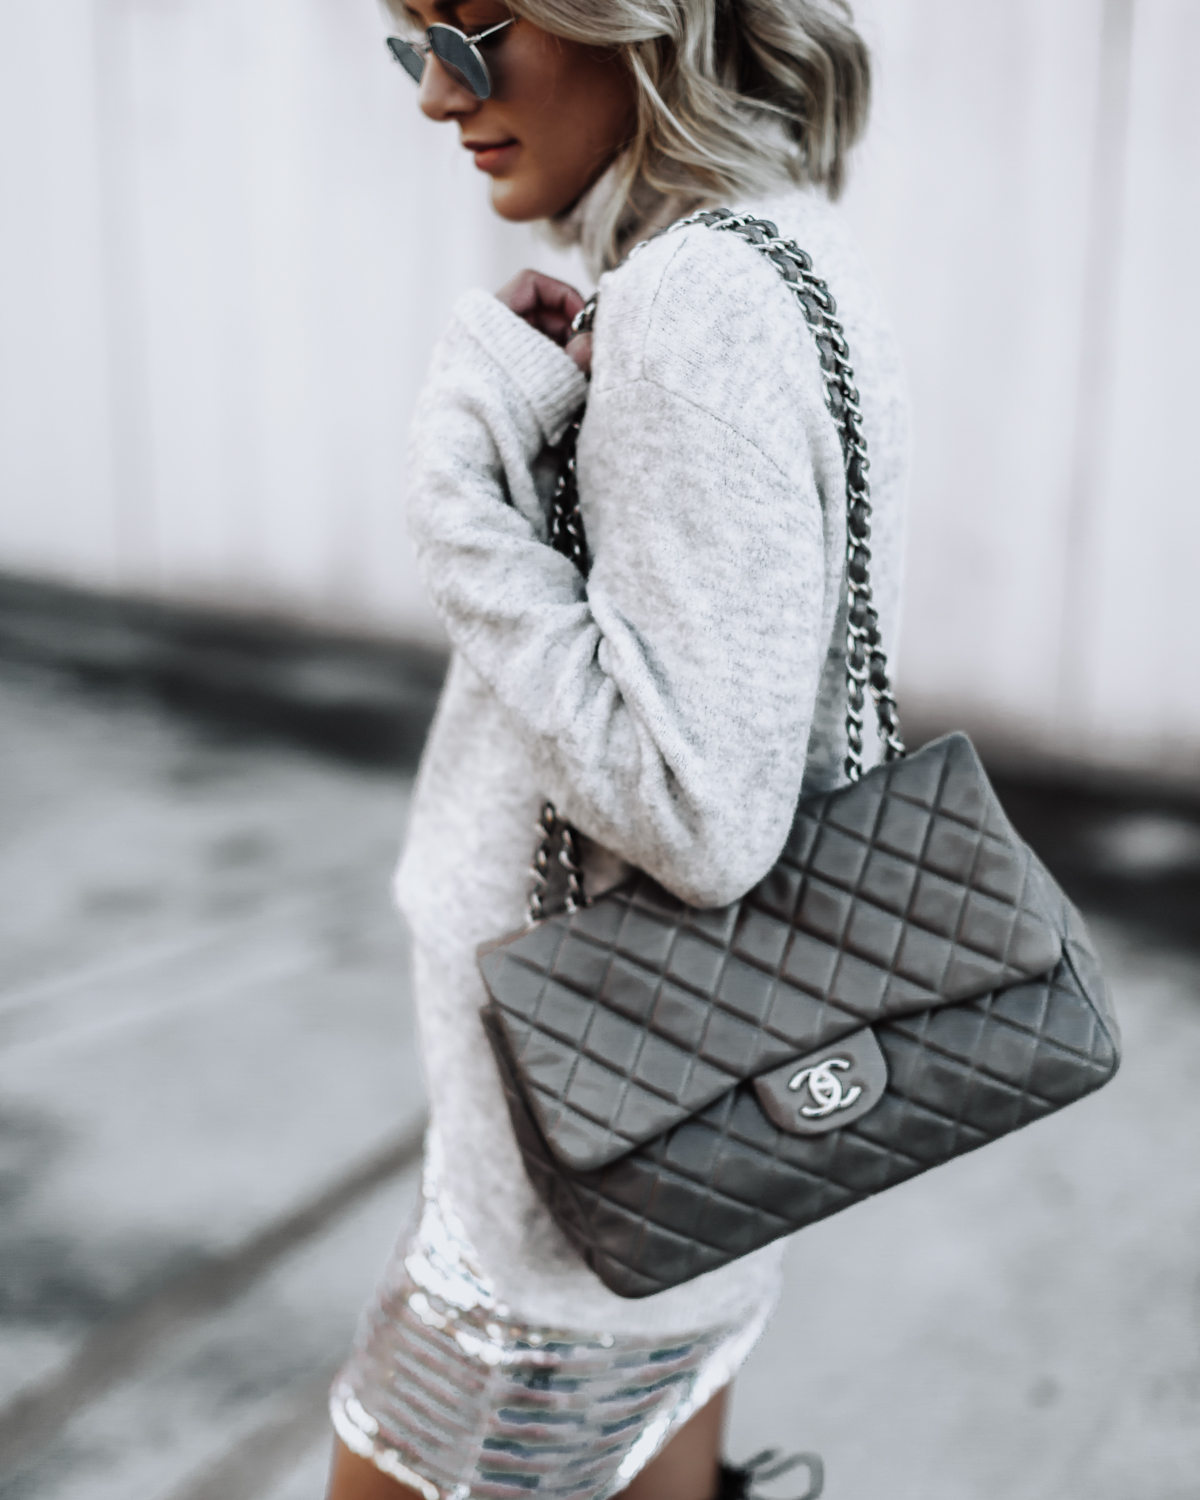 grey chanel flap bag from Tradesy worn by Sage Coralli of So Sage Blog